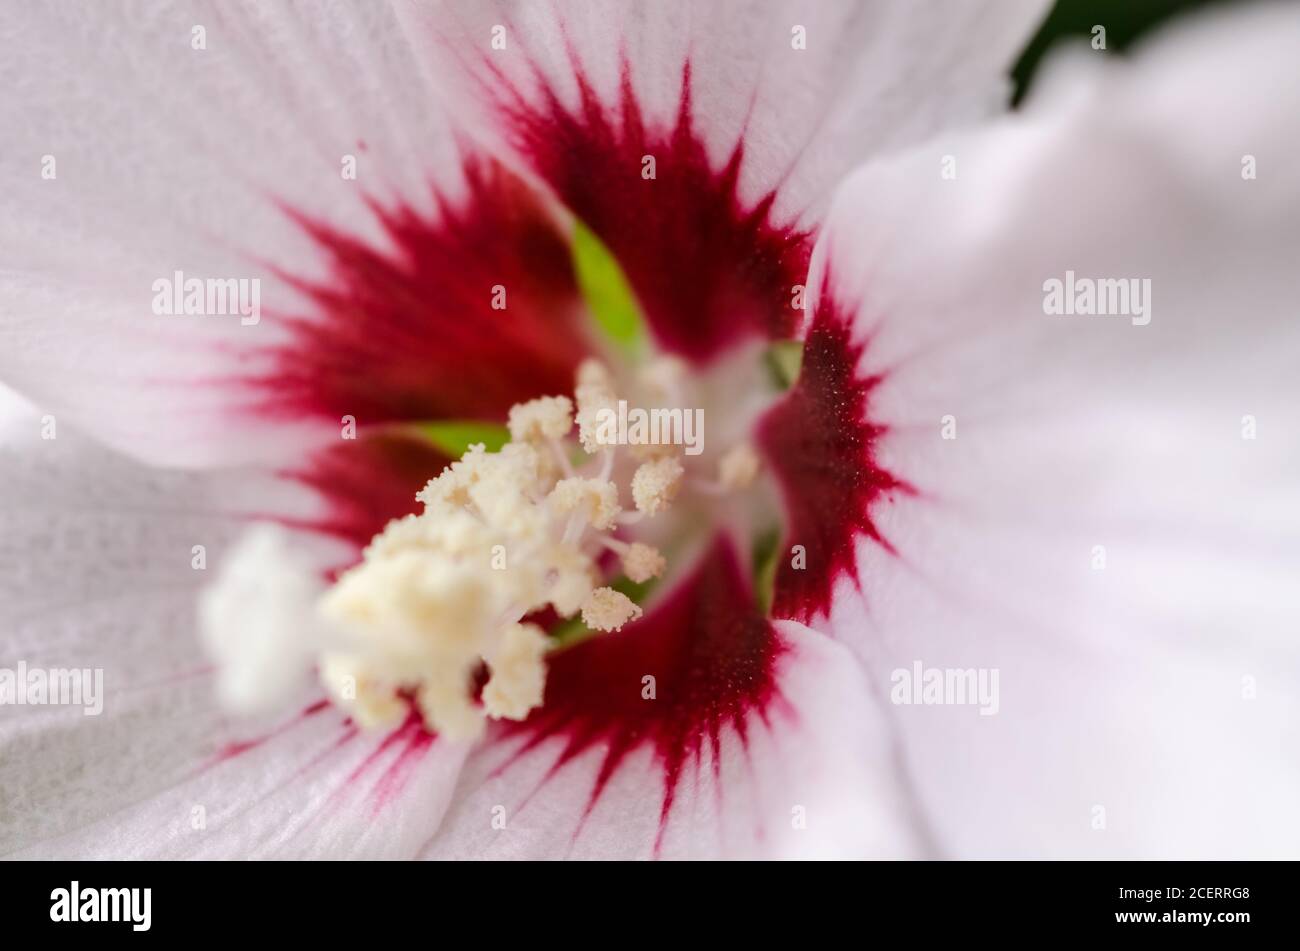 Hibiscus laevis, known as Halberd-leaf rosemallow, herbaceous perennial flower with creamy-white and dark red petals, Germany, Western Europe Stock Photo